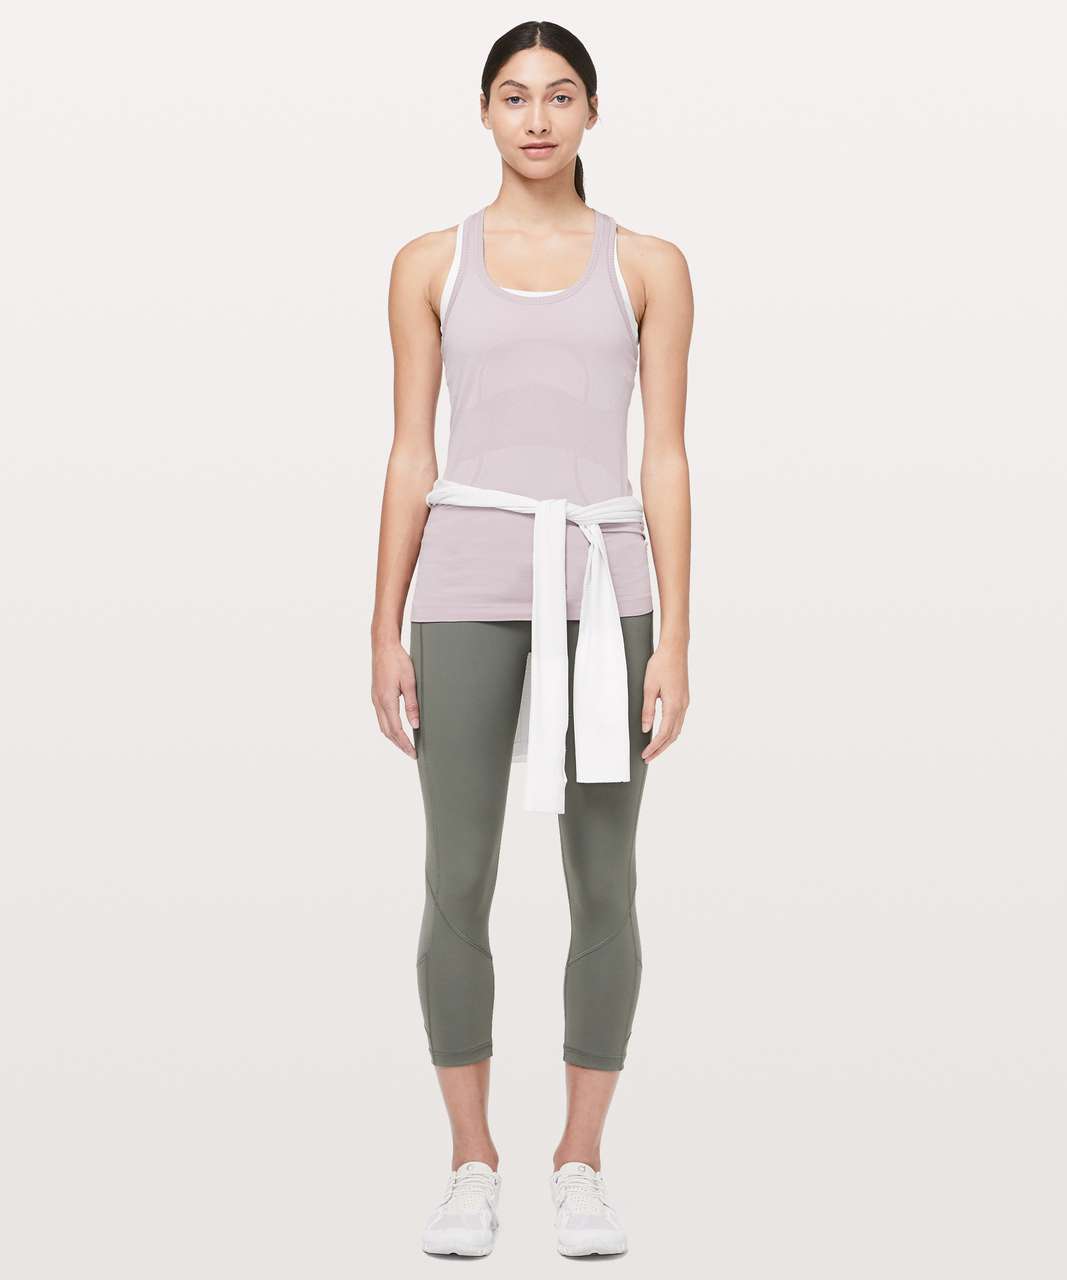 Lululemon Pace Rival Crop (Full-On Luxtreme) - Dottie Tribe White